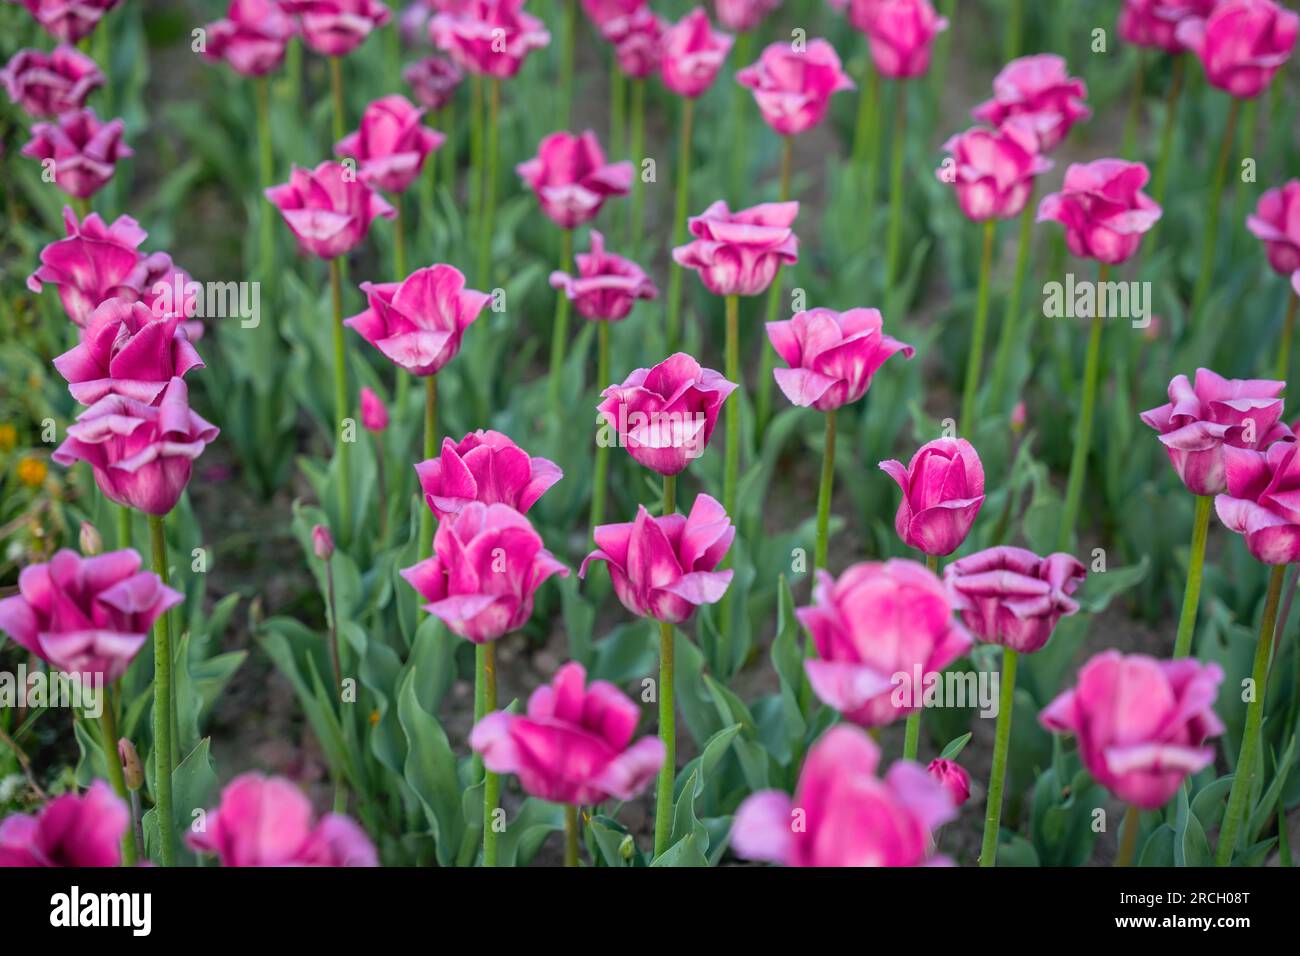 Pink tulips in the beds are starting to wilt. Stock Photo